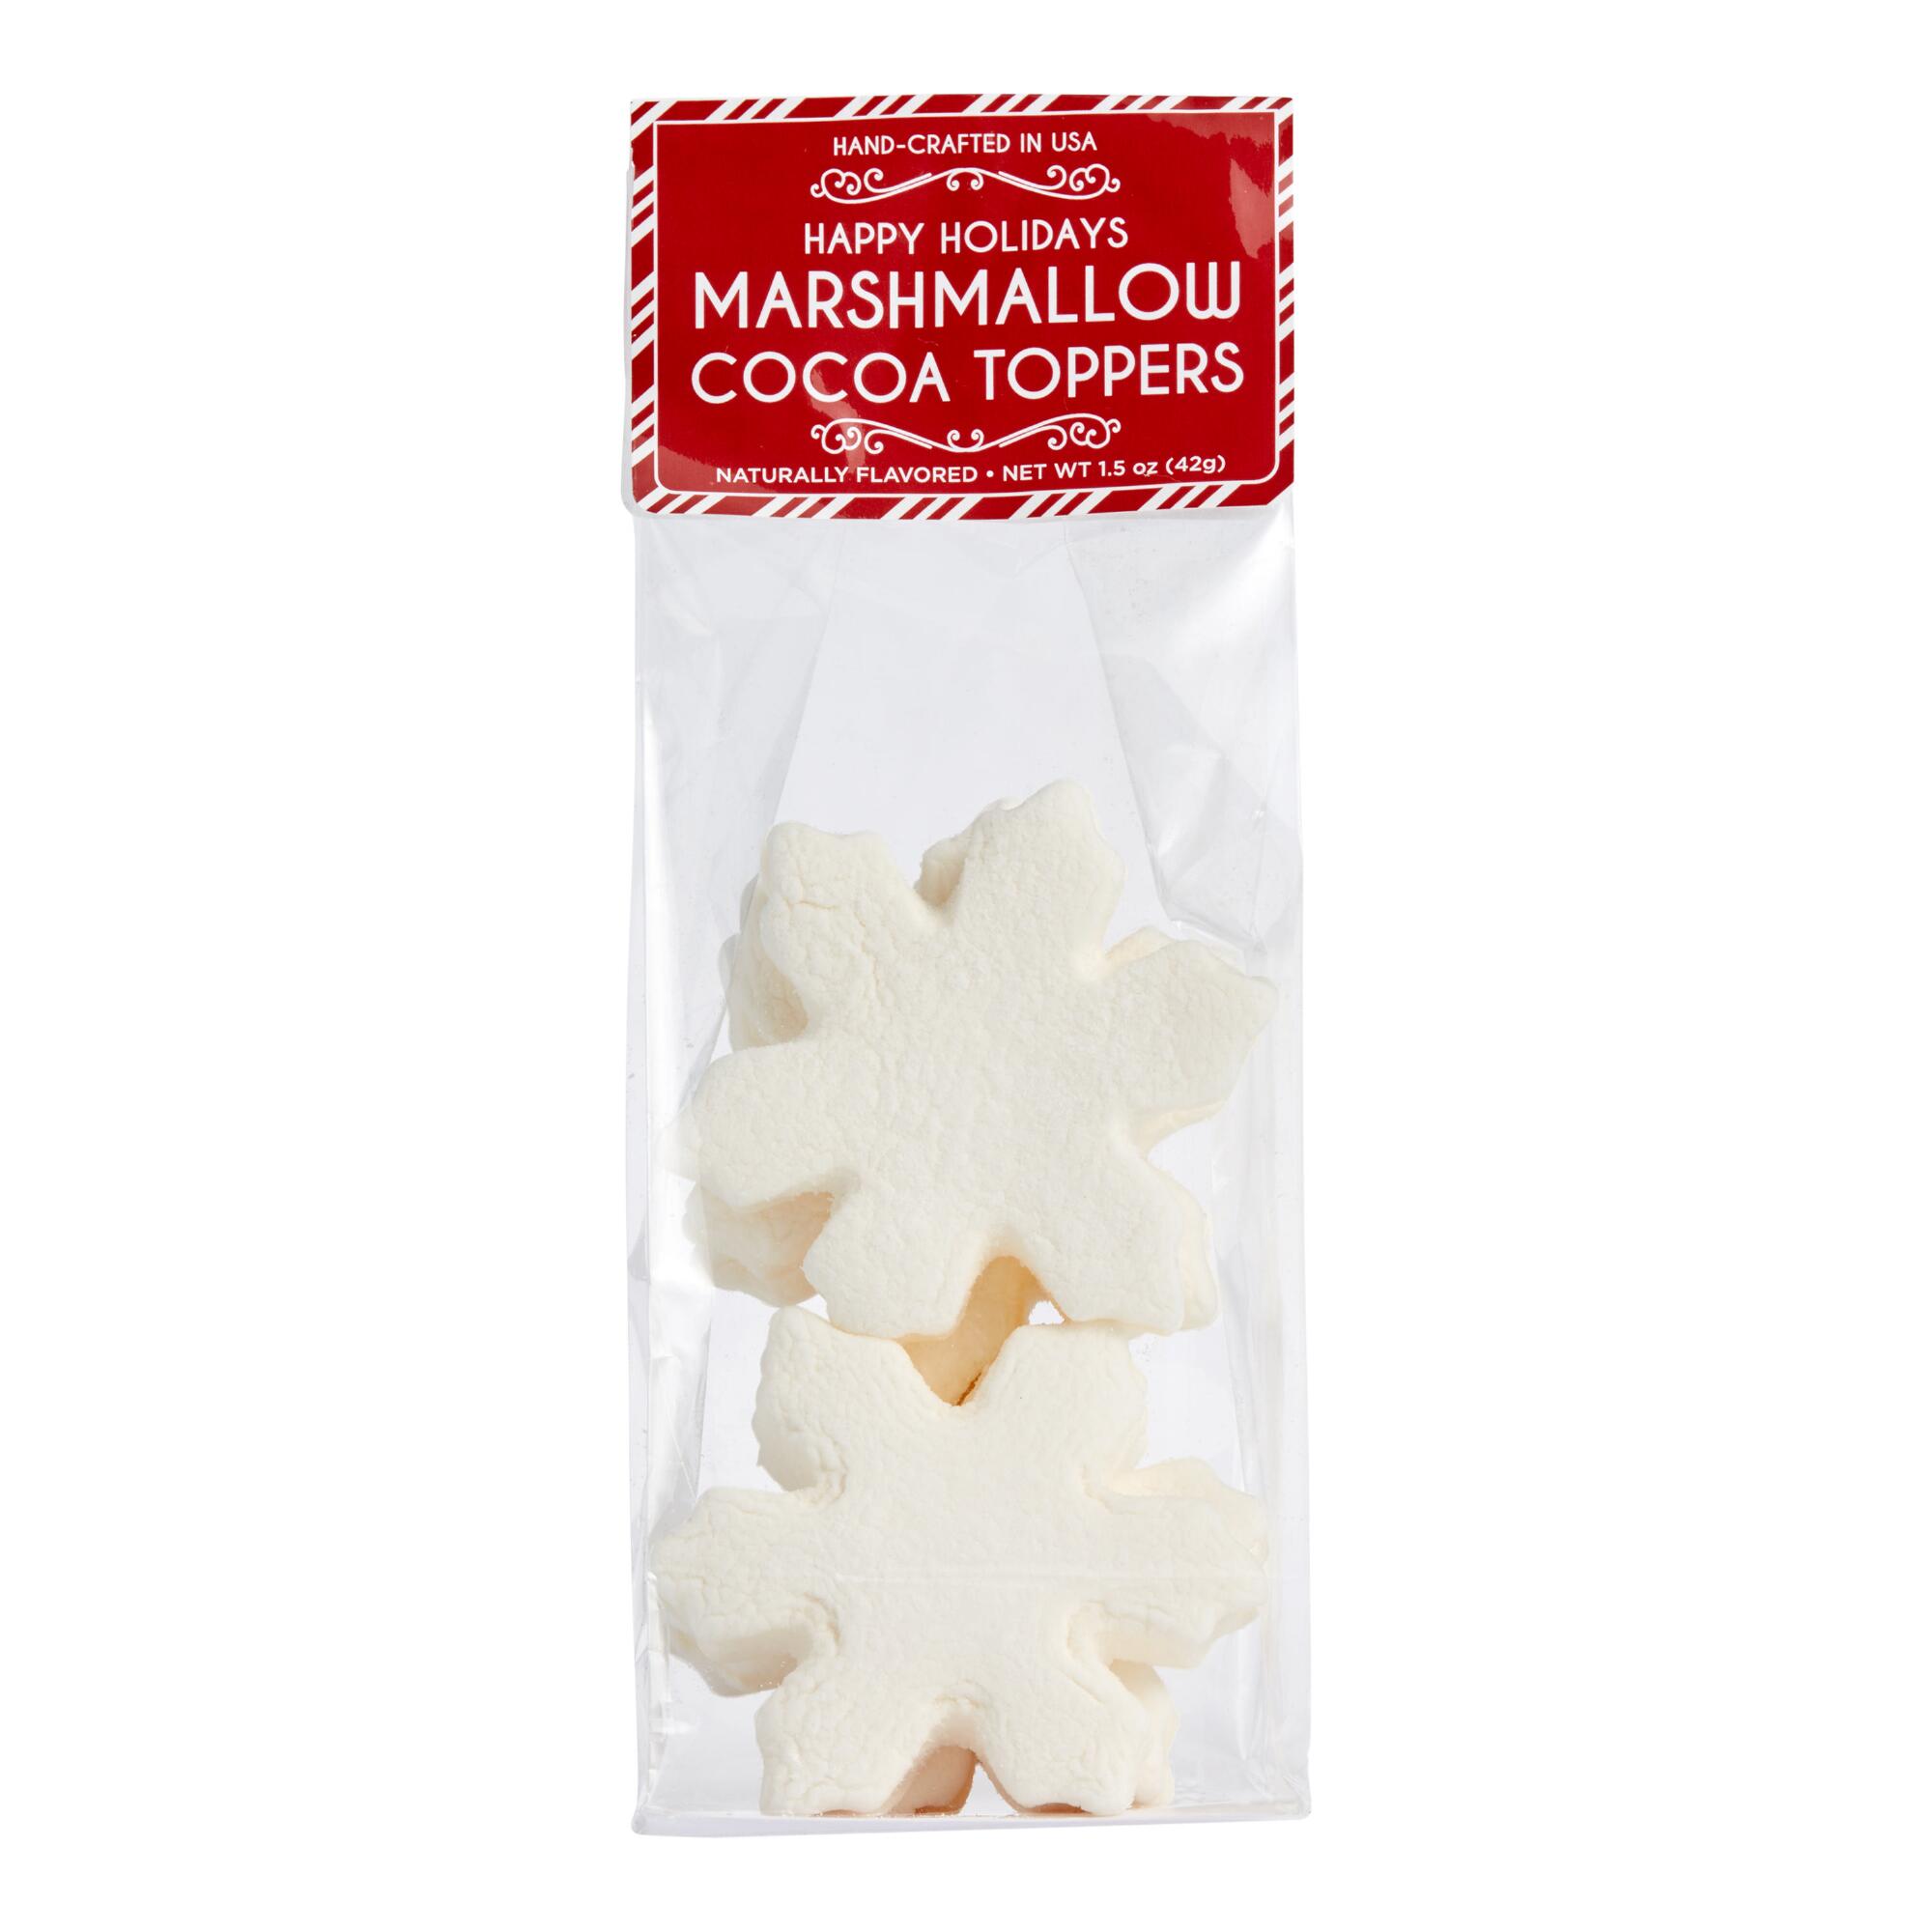 Snowflake Marshmallow Hot Cocoa Toppers 6 Count by World Market